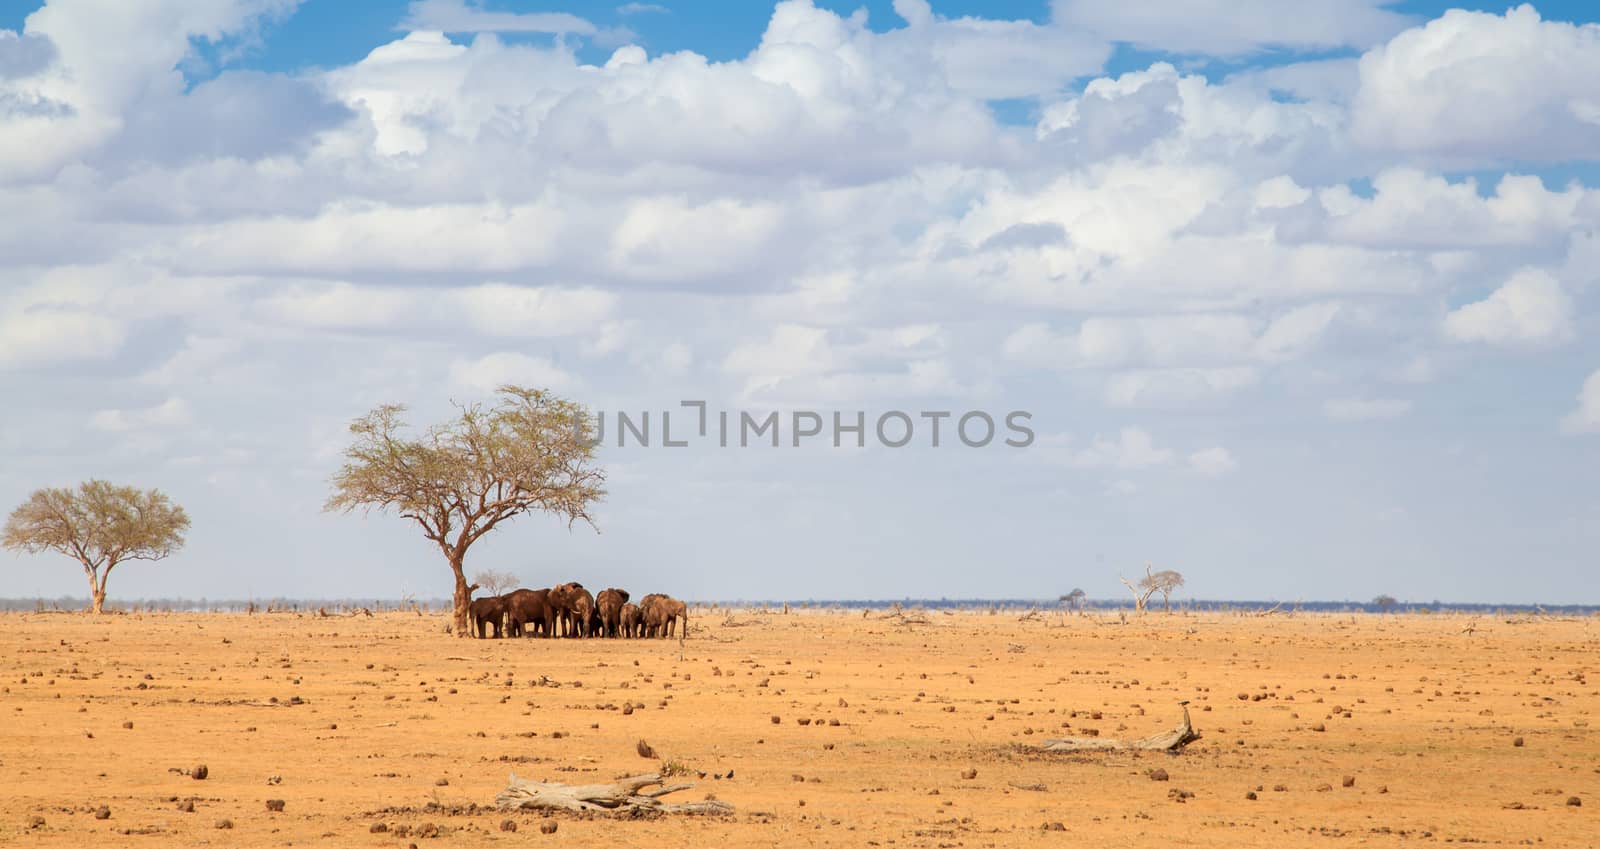 A lot of elephants standing under a big tree, on safari in Kenya by 25ehaag6